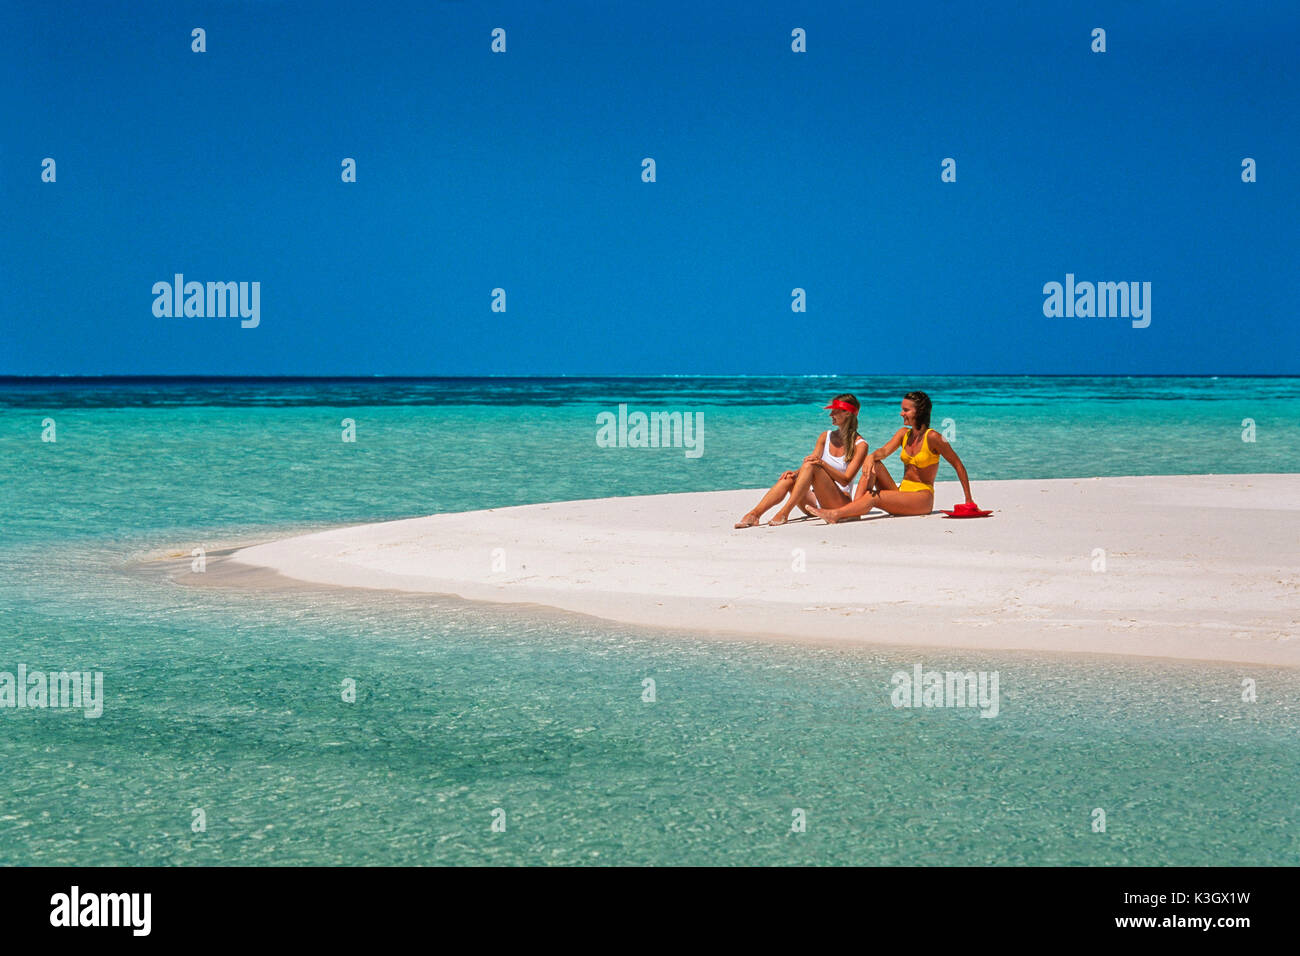 Two women on a lonesome beach Stock Photo